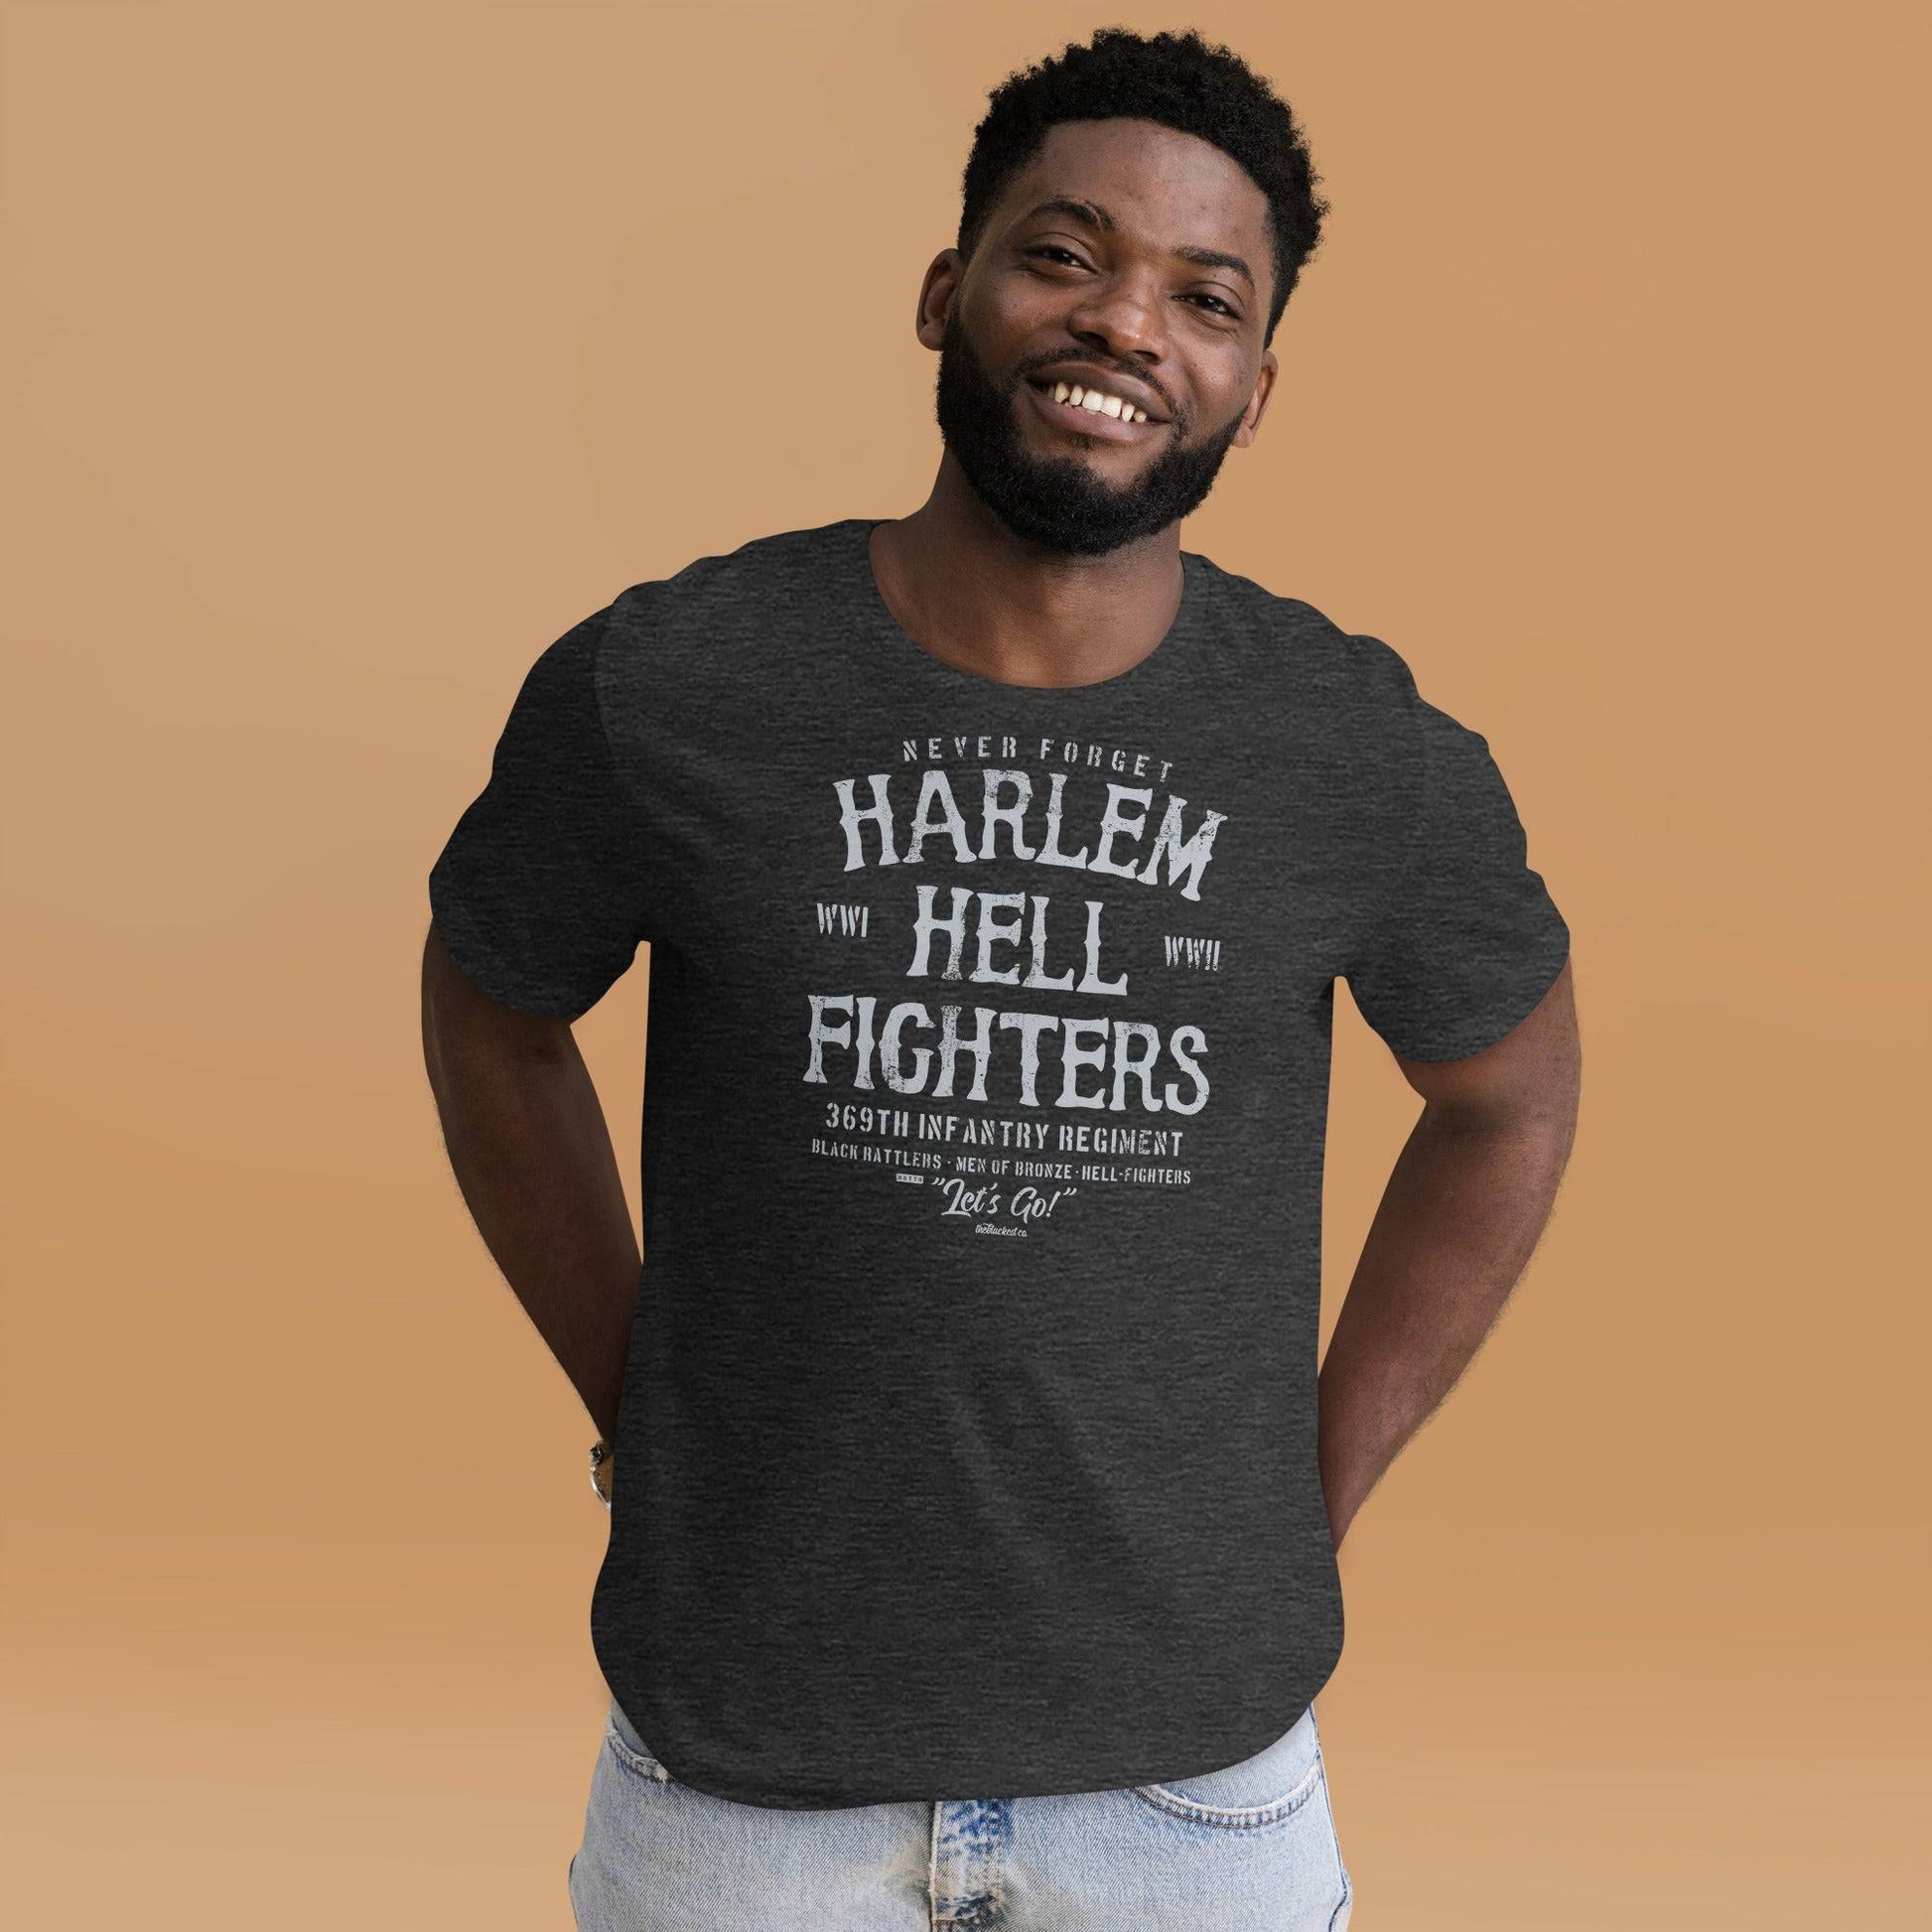 man wearing a black t shirt with white text that reads harlem hellfighters wwi and wwii